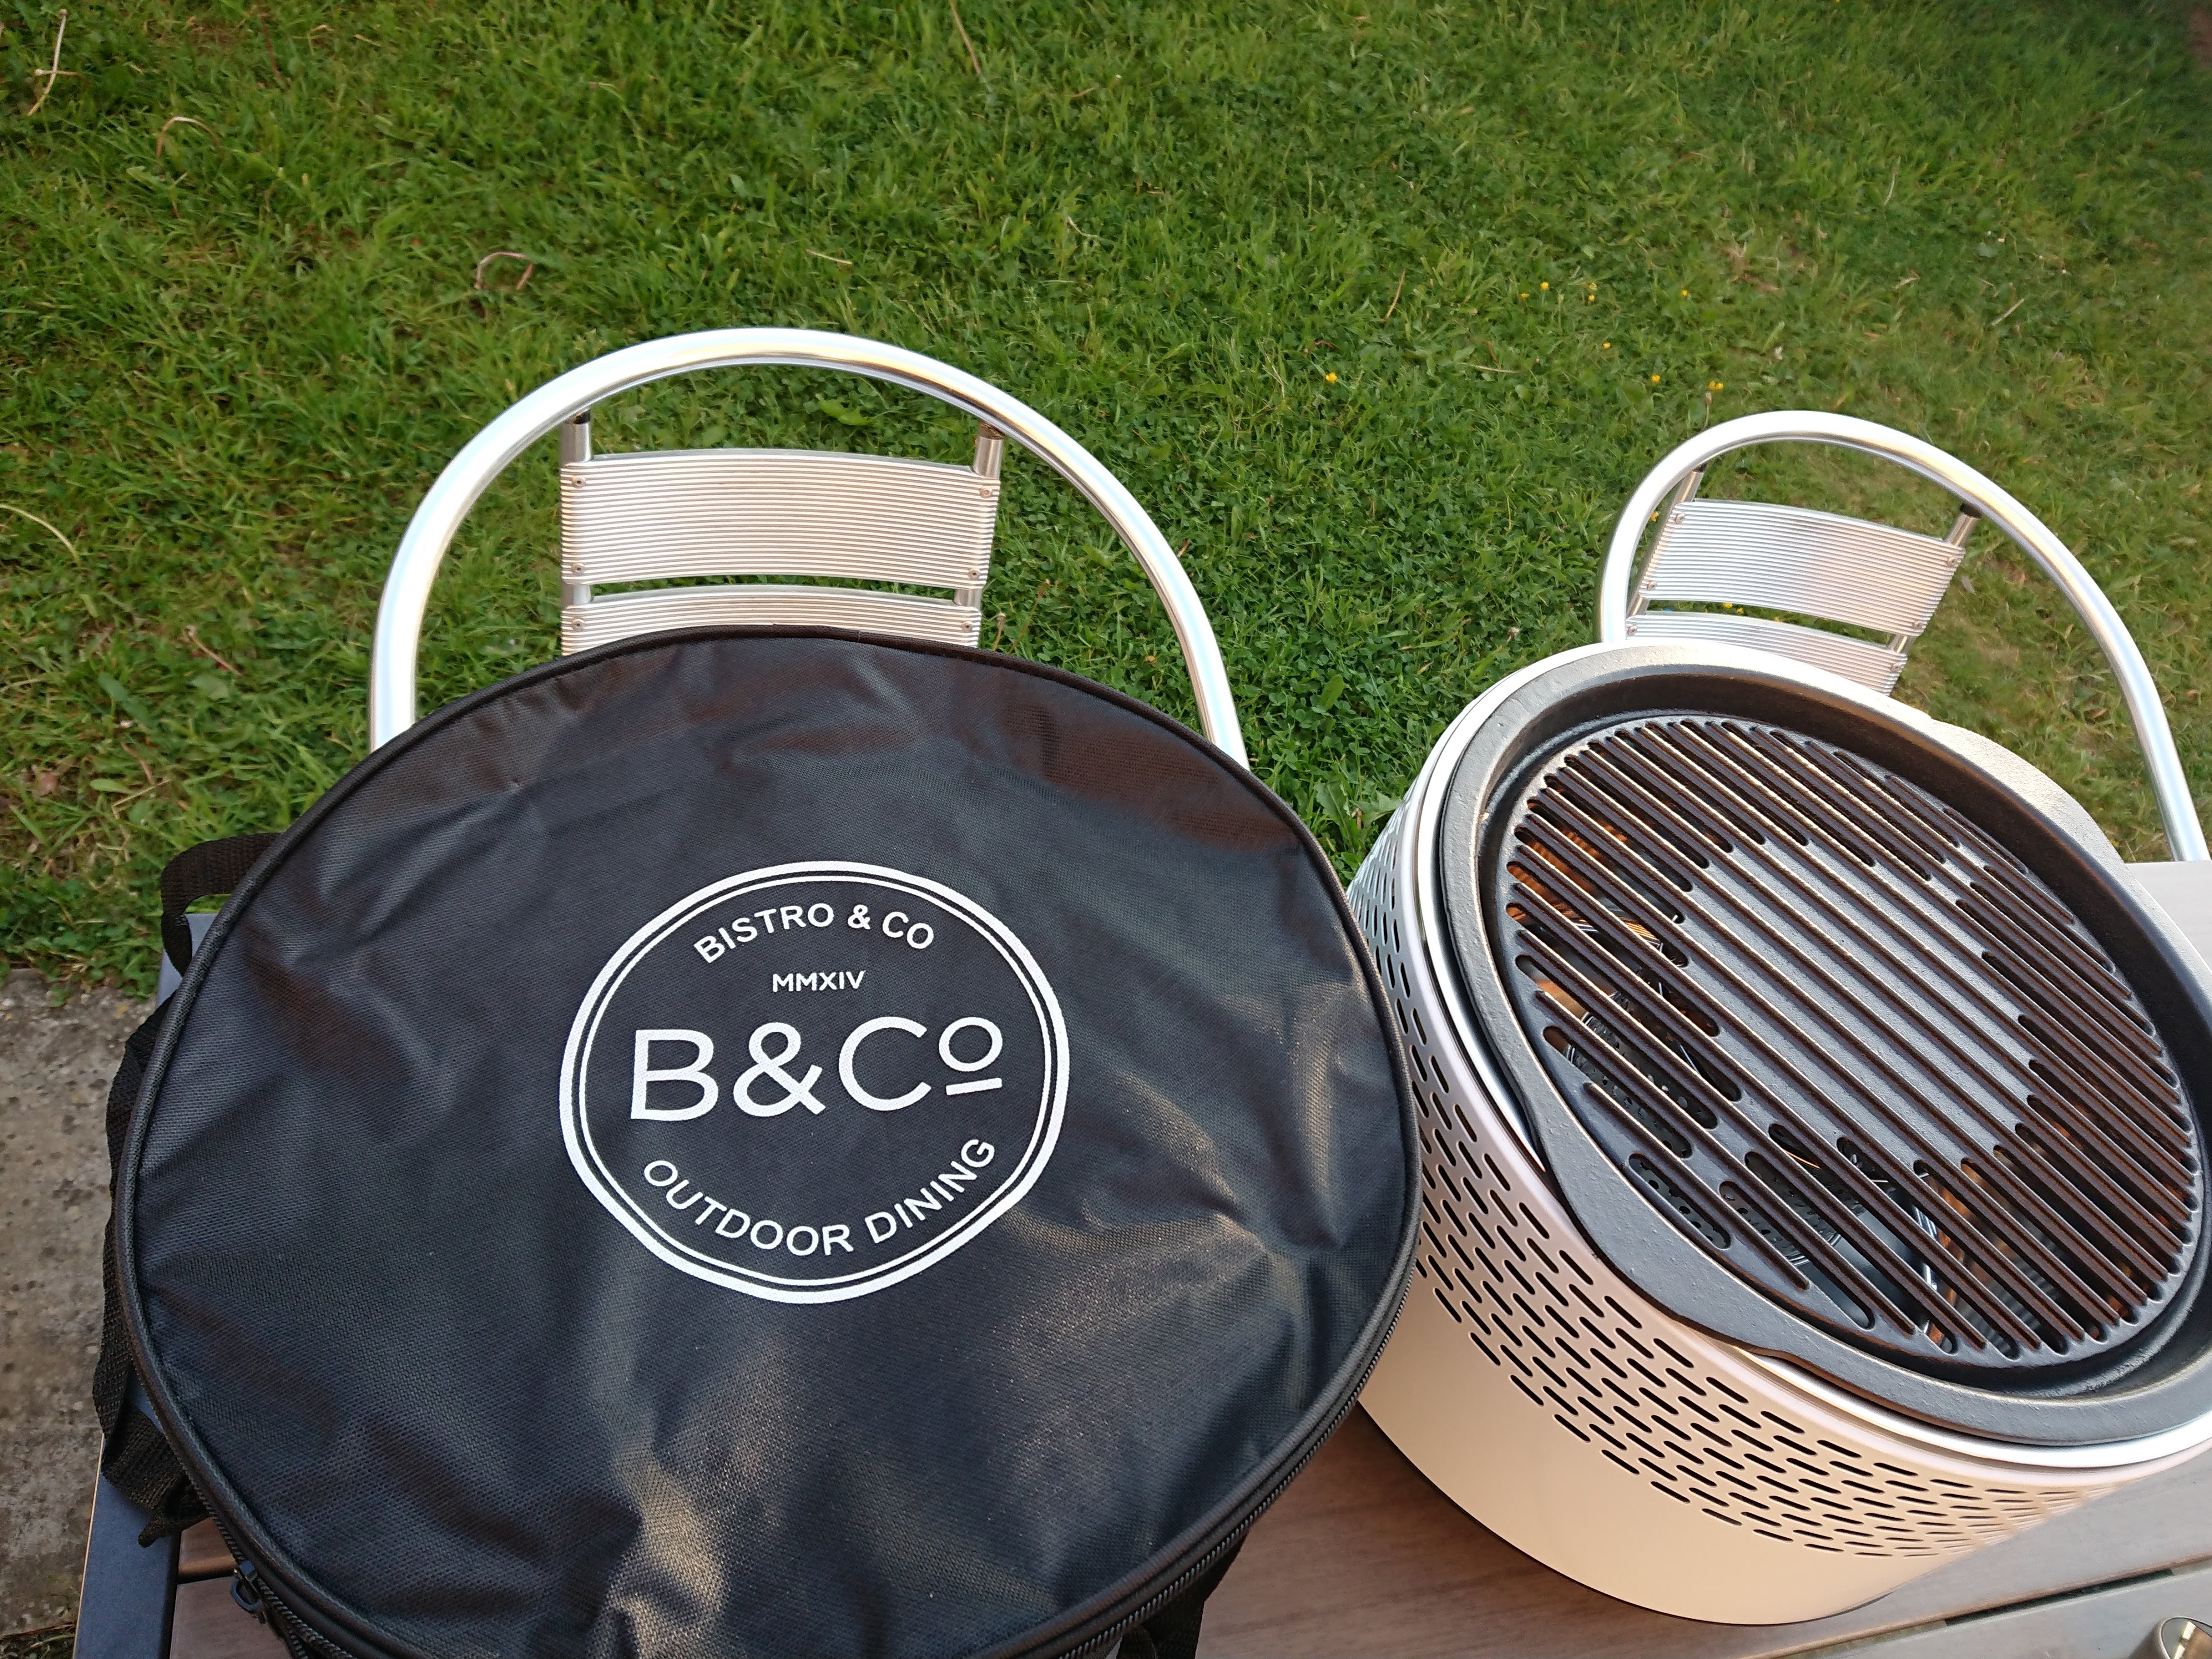 Cooking Up A Feast On The New Summit International Smokeless BBQ